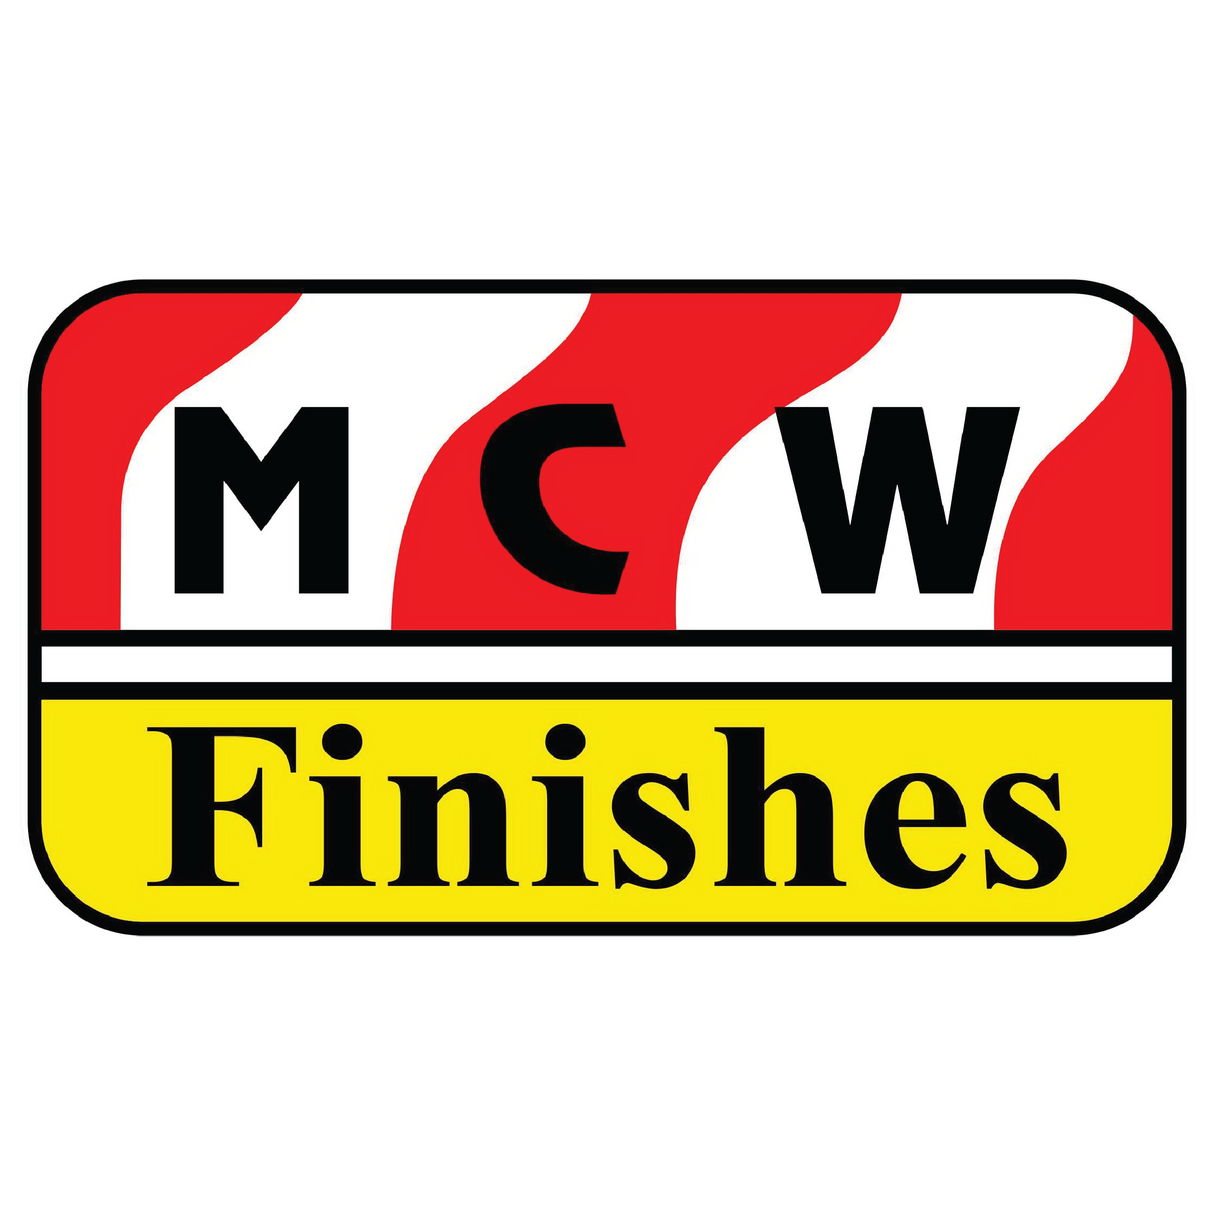 MCW Finishes Gloss Black